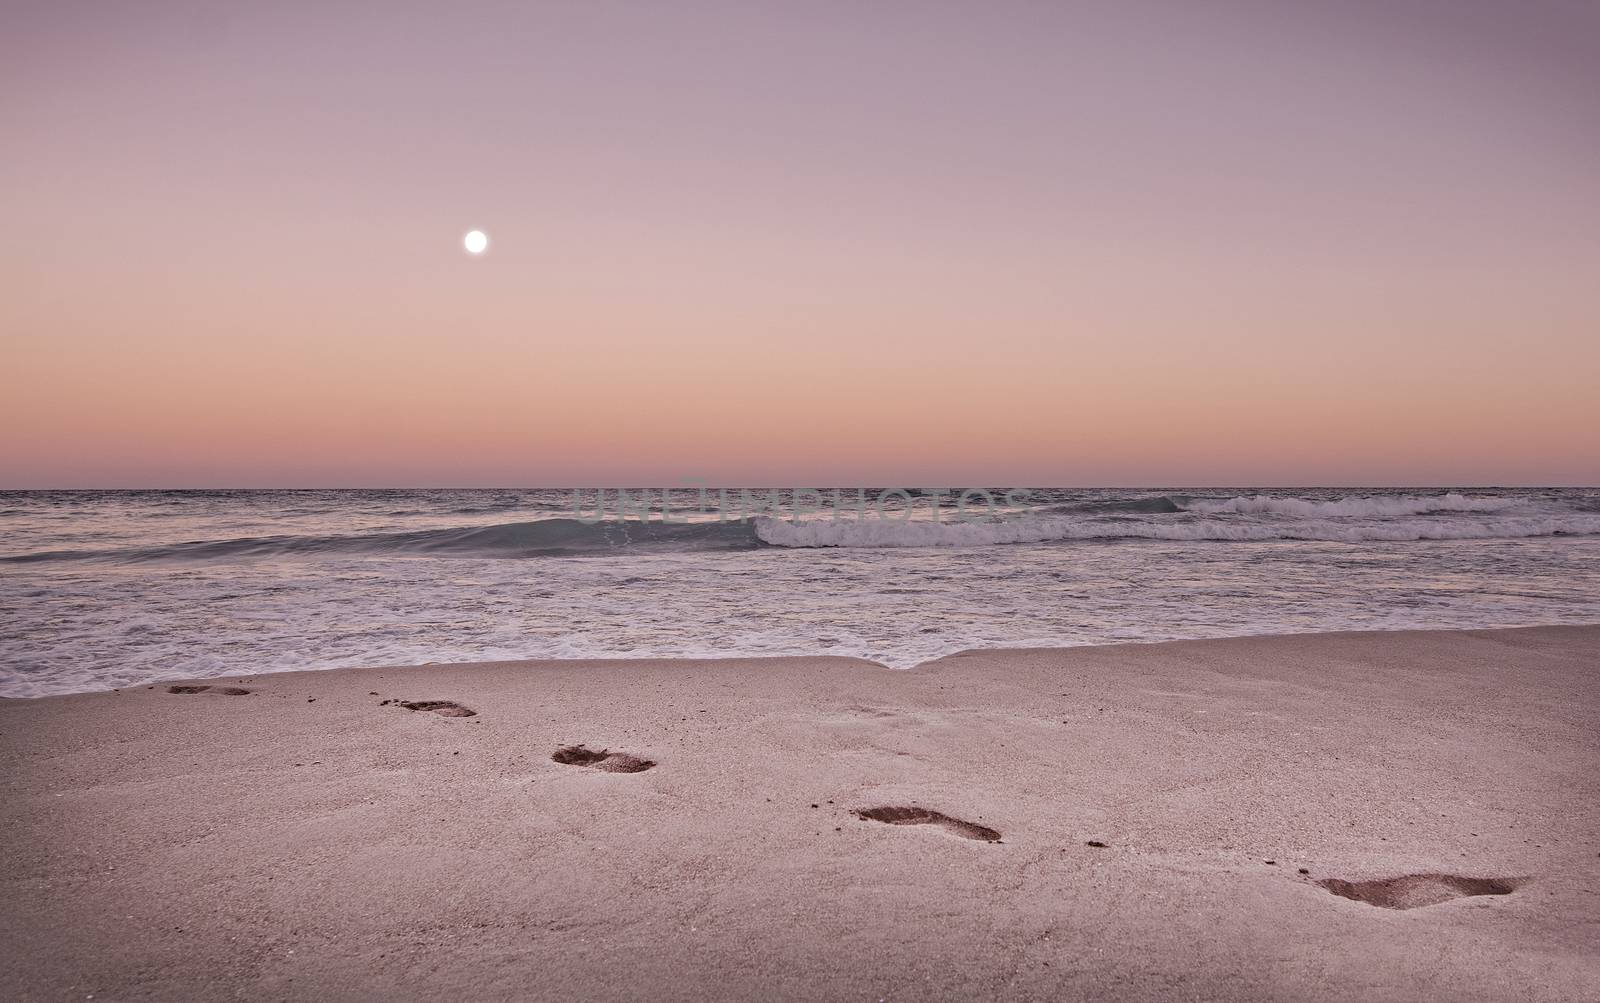 Empty sandy beach with footprints, ocean waves and full moon in expressive dusk orange and purple toned in color Living Coral.